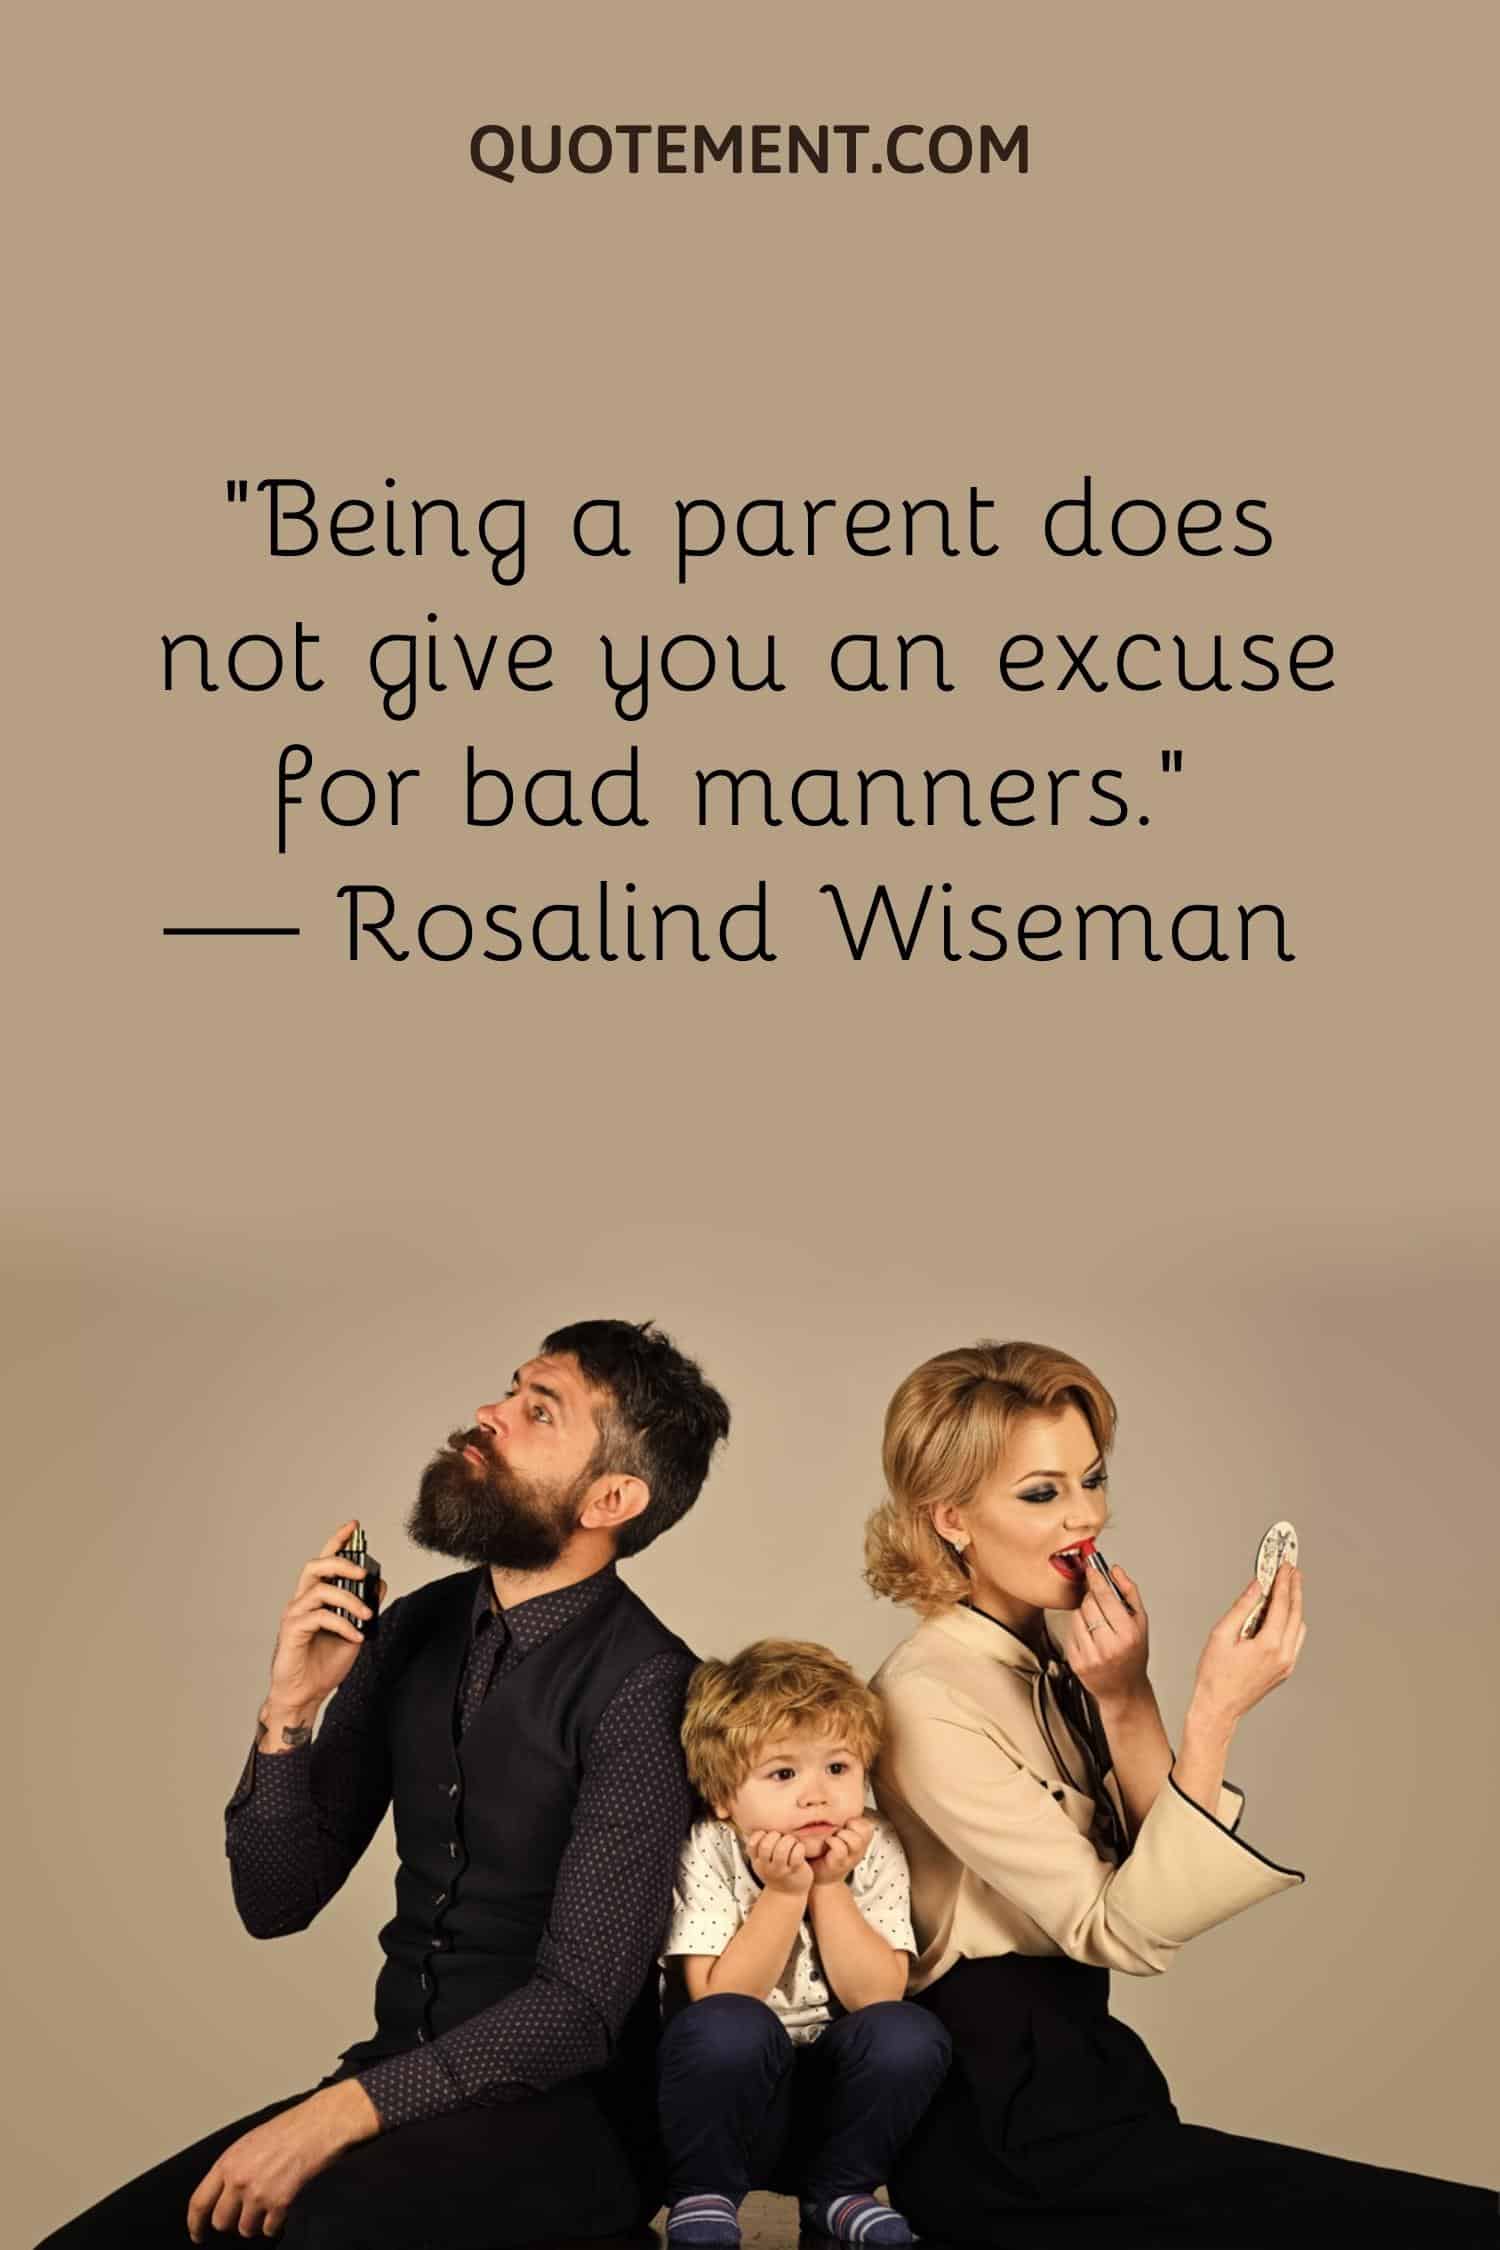 Being a parent does not give you an excuse for bad manners